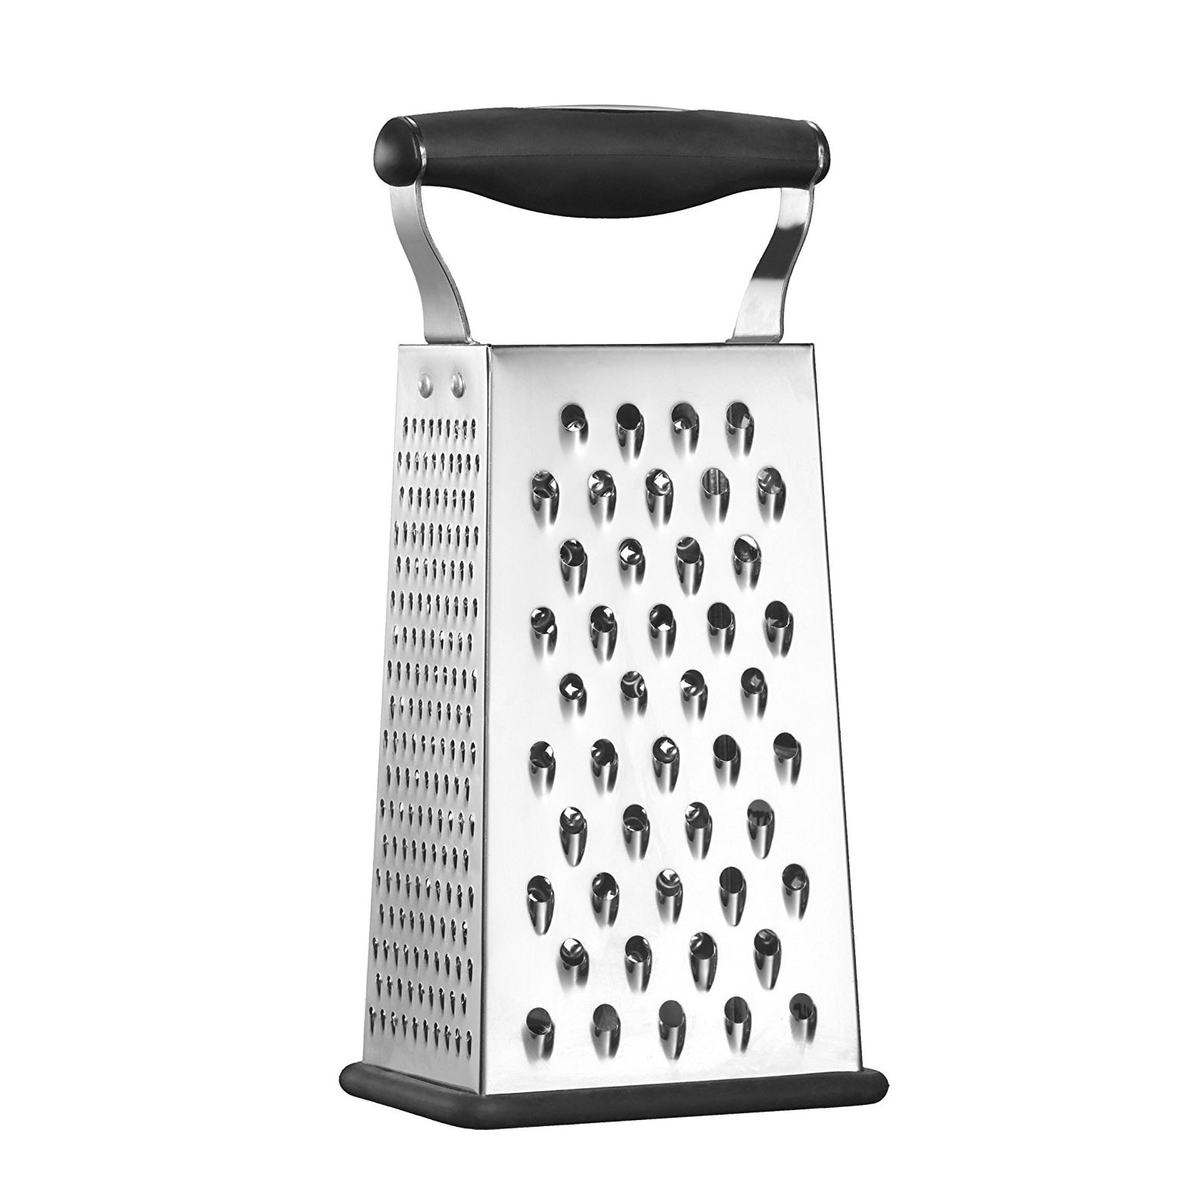 Cheese grater